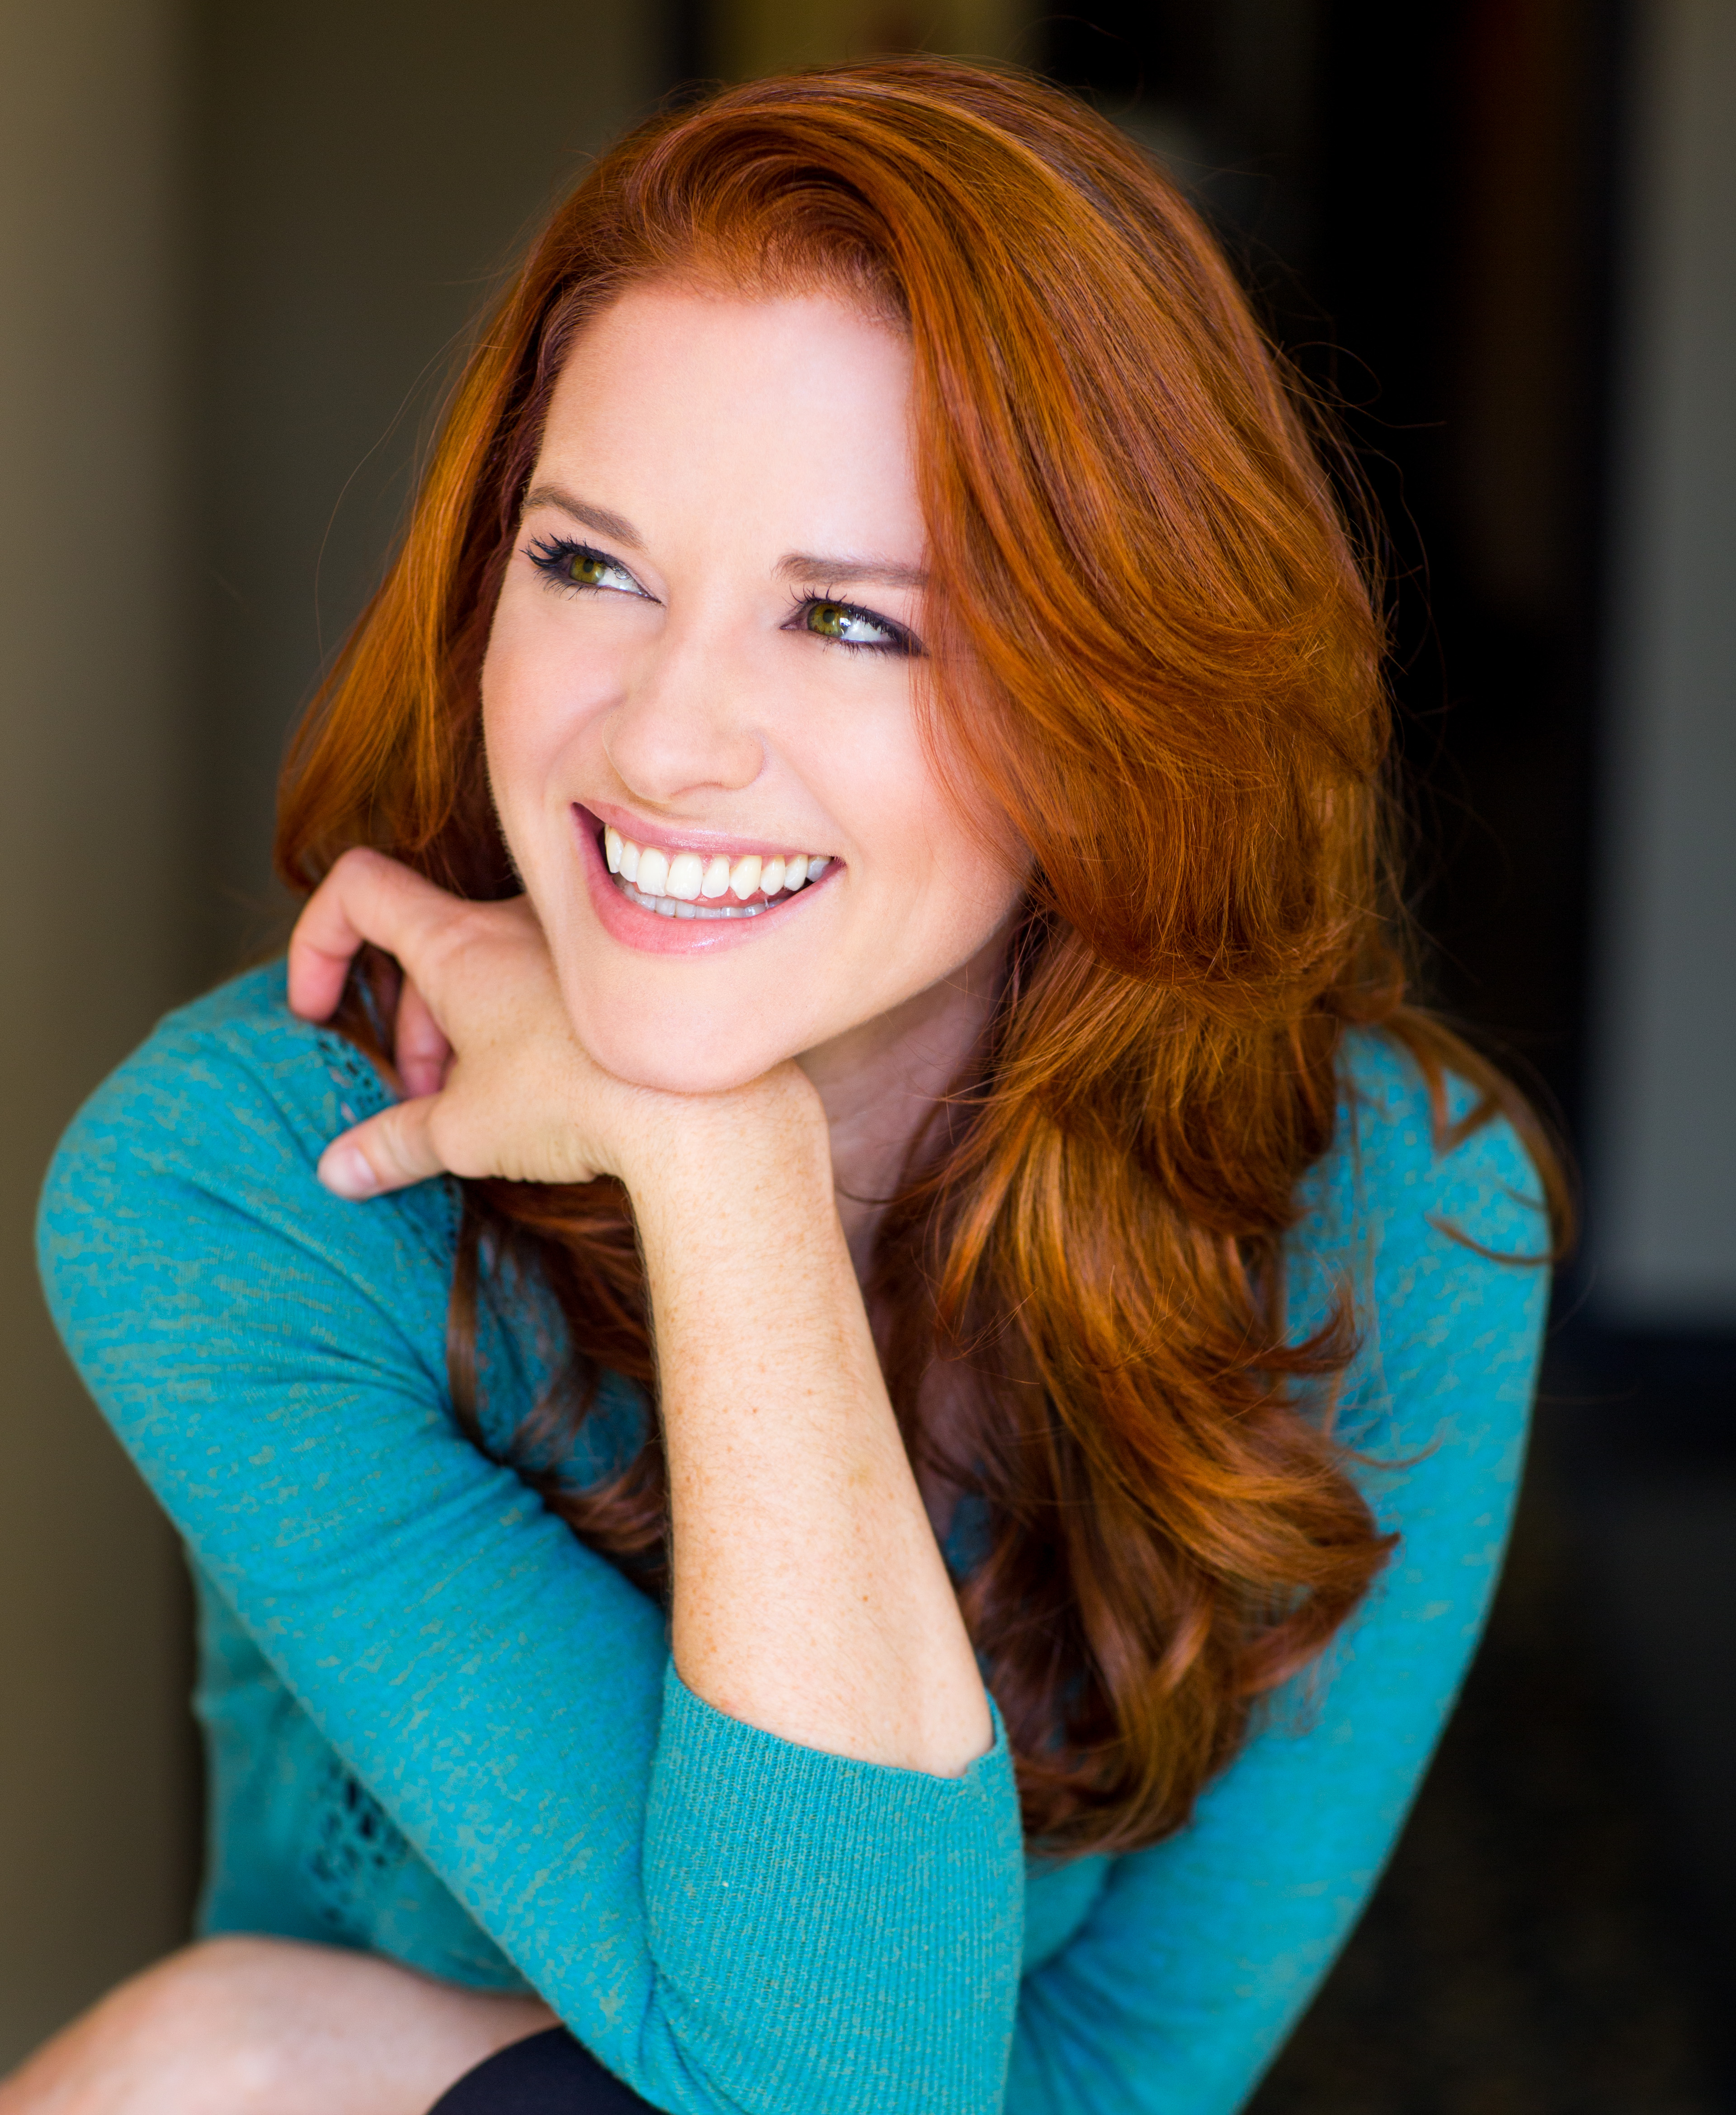 Sarah Drew first earned acclaim for her starring role in “Romeo and Juliet” while still a fourth-year student, and has since gone on to a successful acting career.